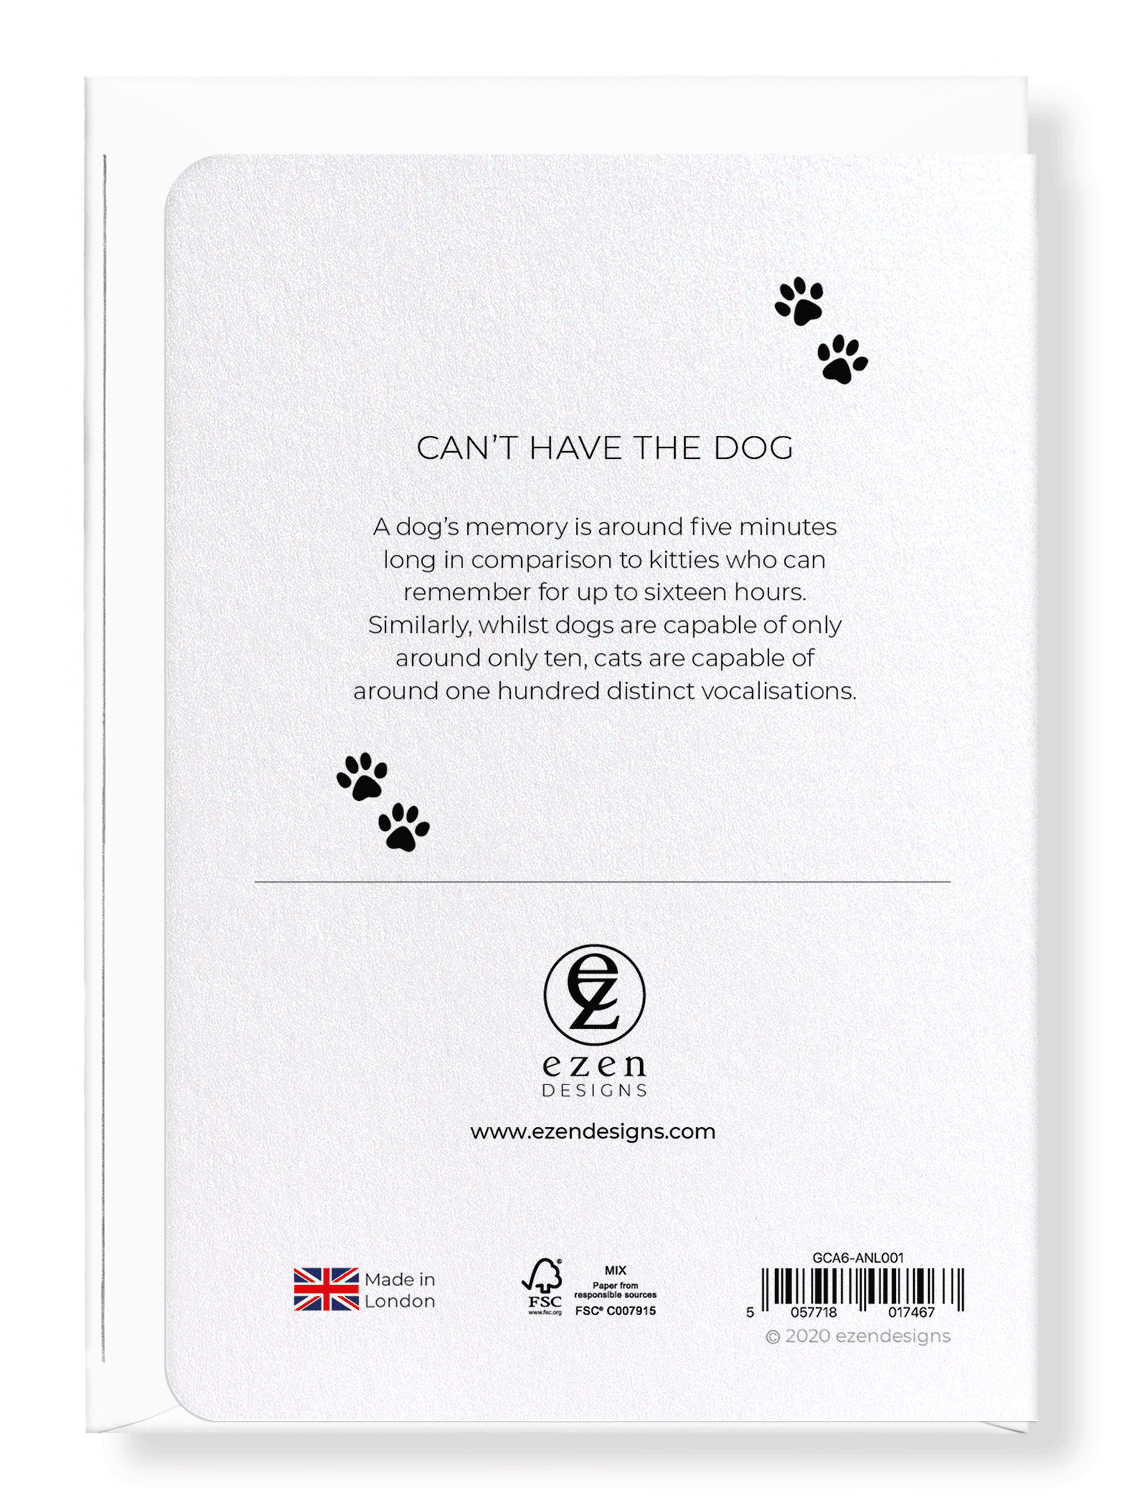 Ezen Designs - Can't have the dog - Greeting Card - Back